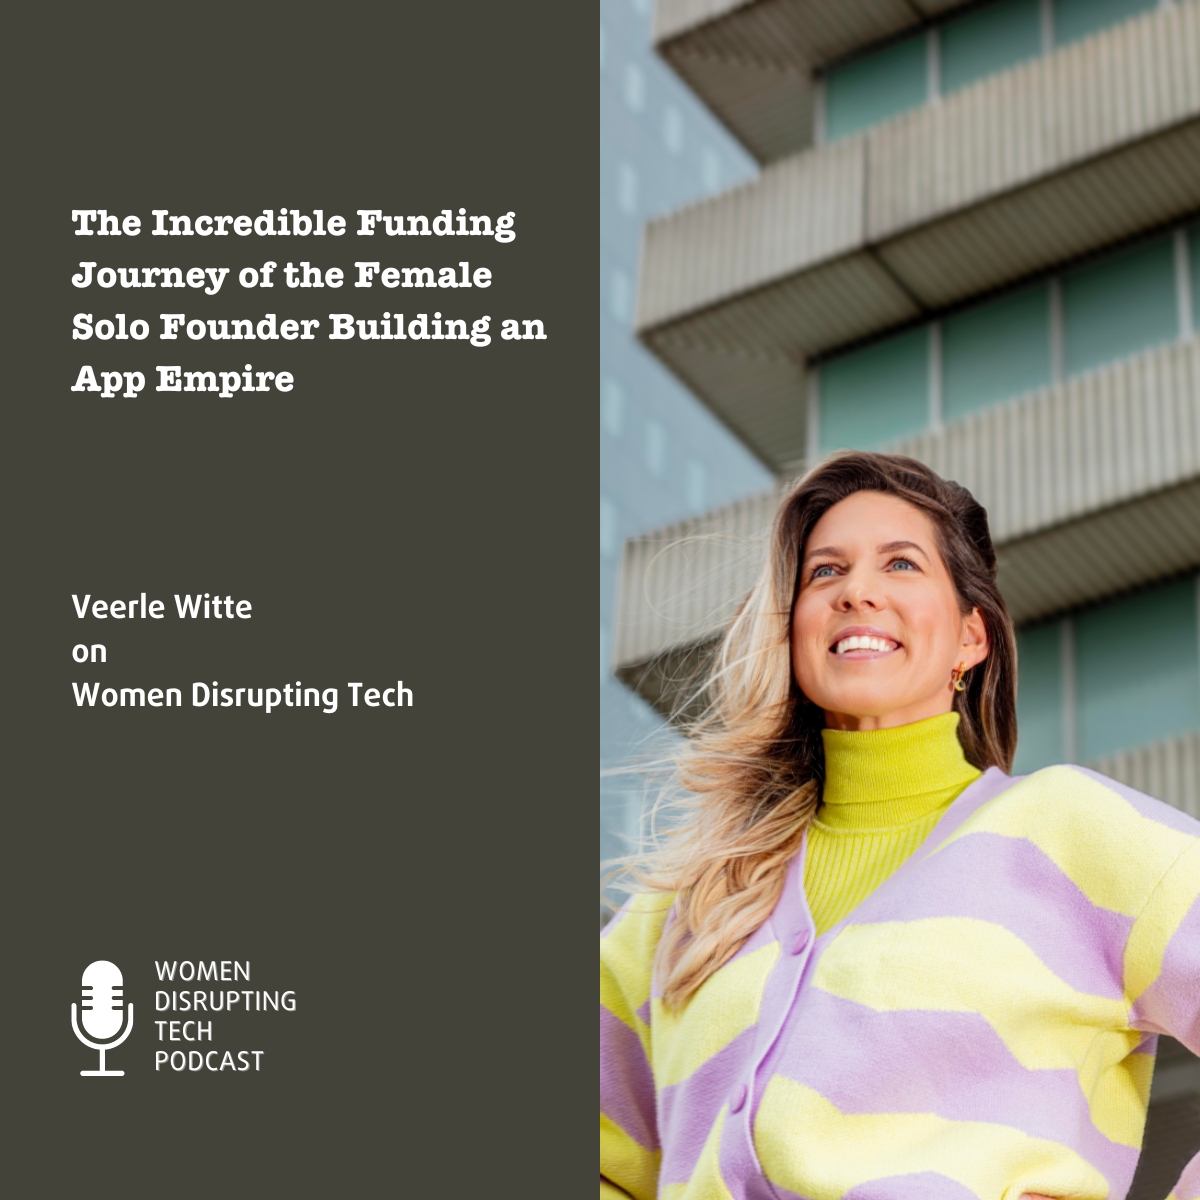 Picture of Veerle Witte, CEO and Founder of Travel Diaries. She is the guest on episode 53 of Women Disrupting Tech. Click the image to listen or search for "Women Disrupting Tech" in your favorite podcast app.